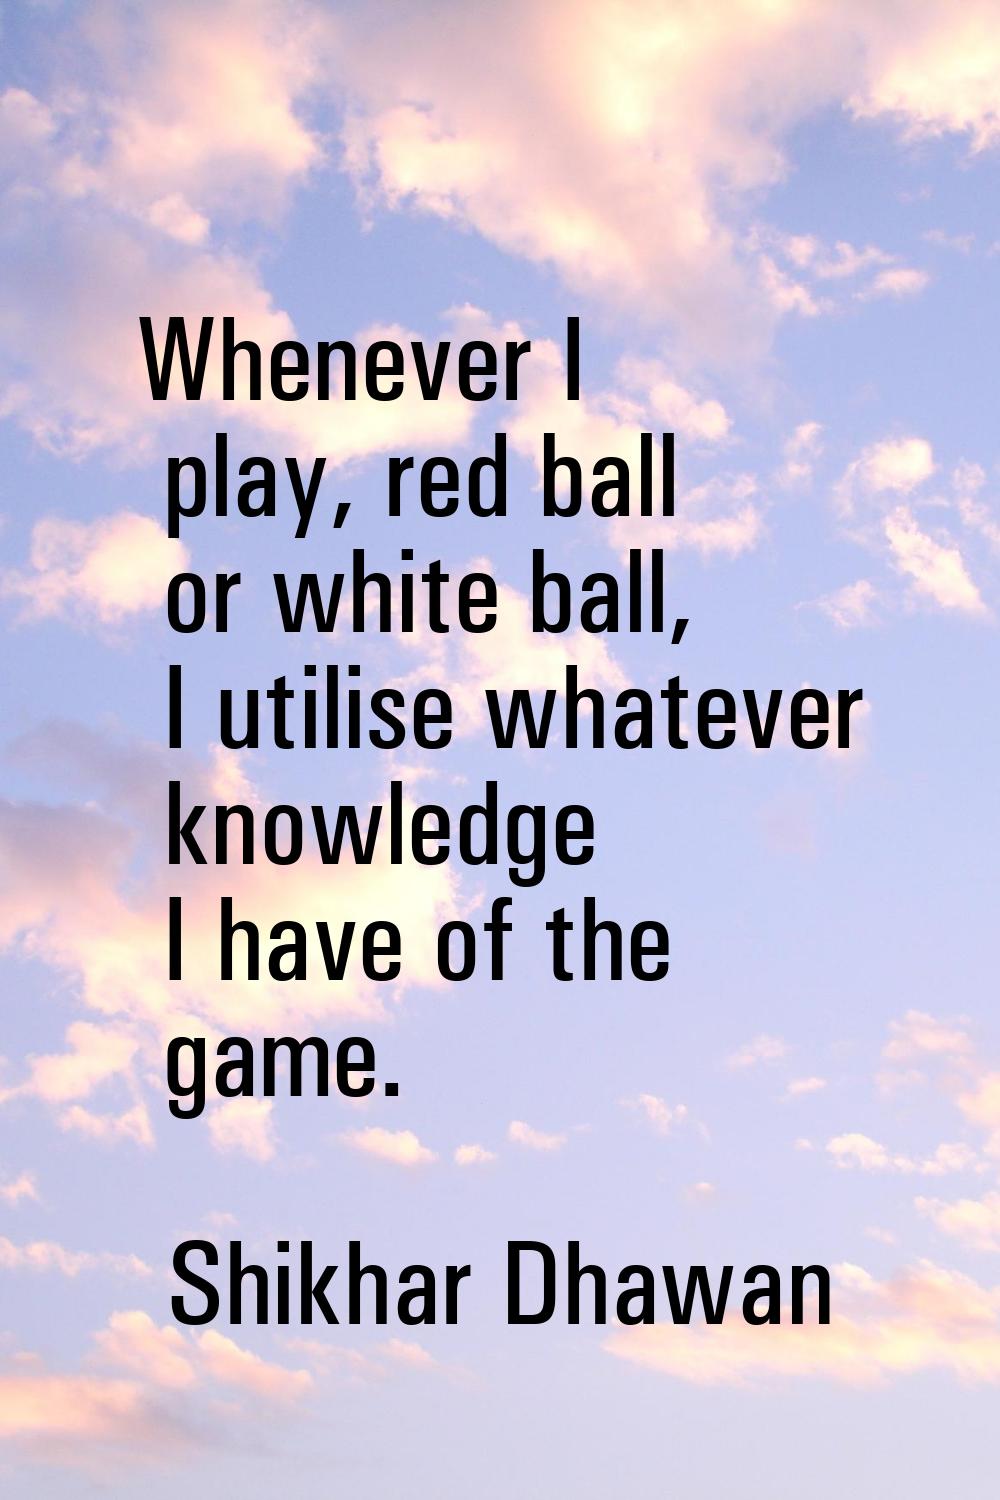 Whenever I play, red ball or white ball, I utilise whatever knowledge I have of the game.